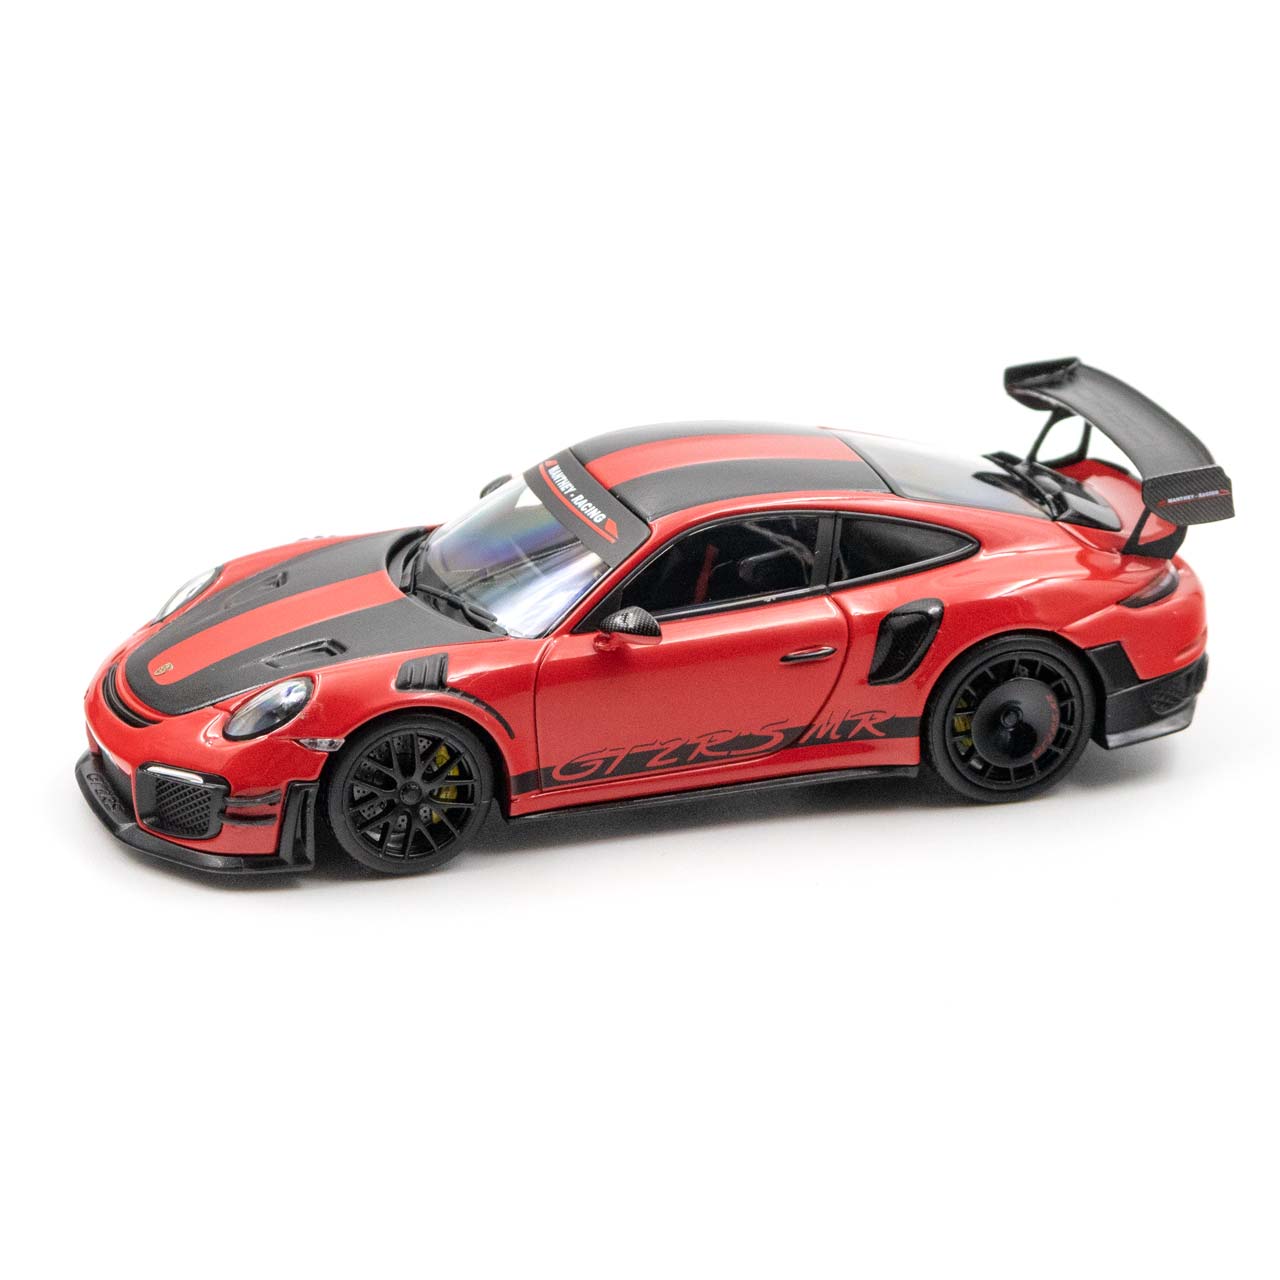 Manthey-Racing Porsche 911 GT2 RS MR 2018 Tour record Nordschleife 1:43 rouge Collector Edition